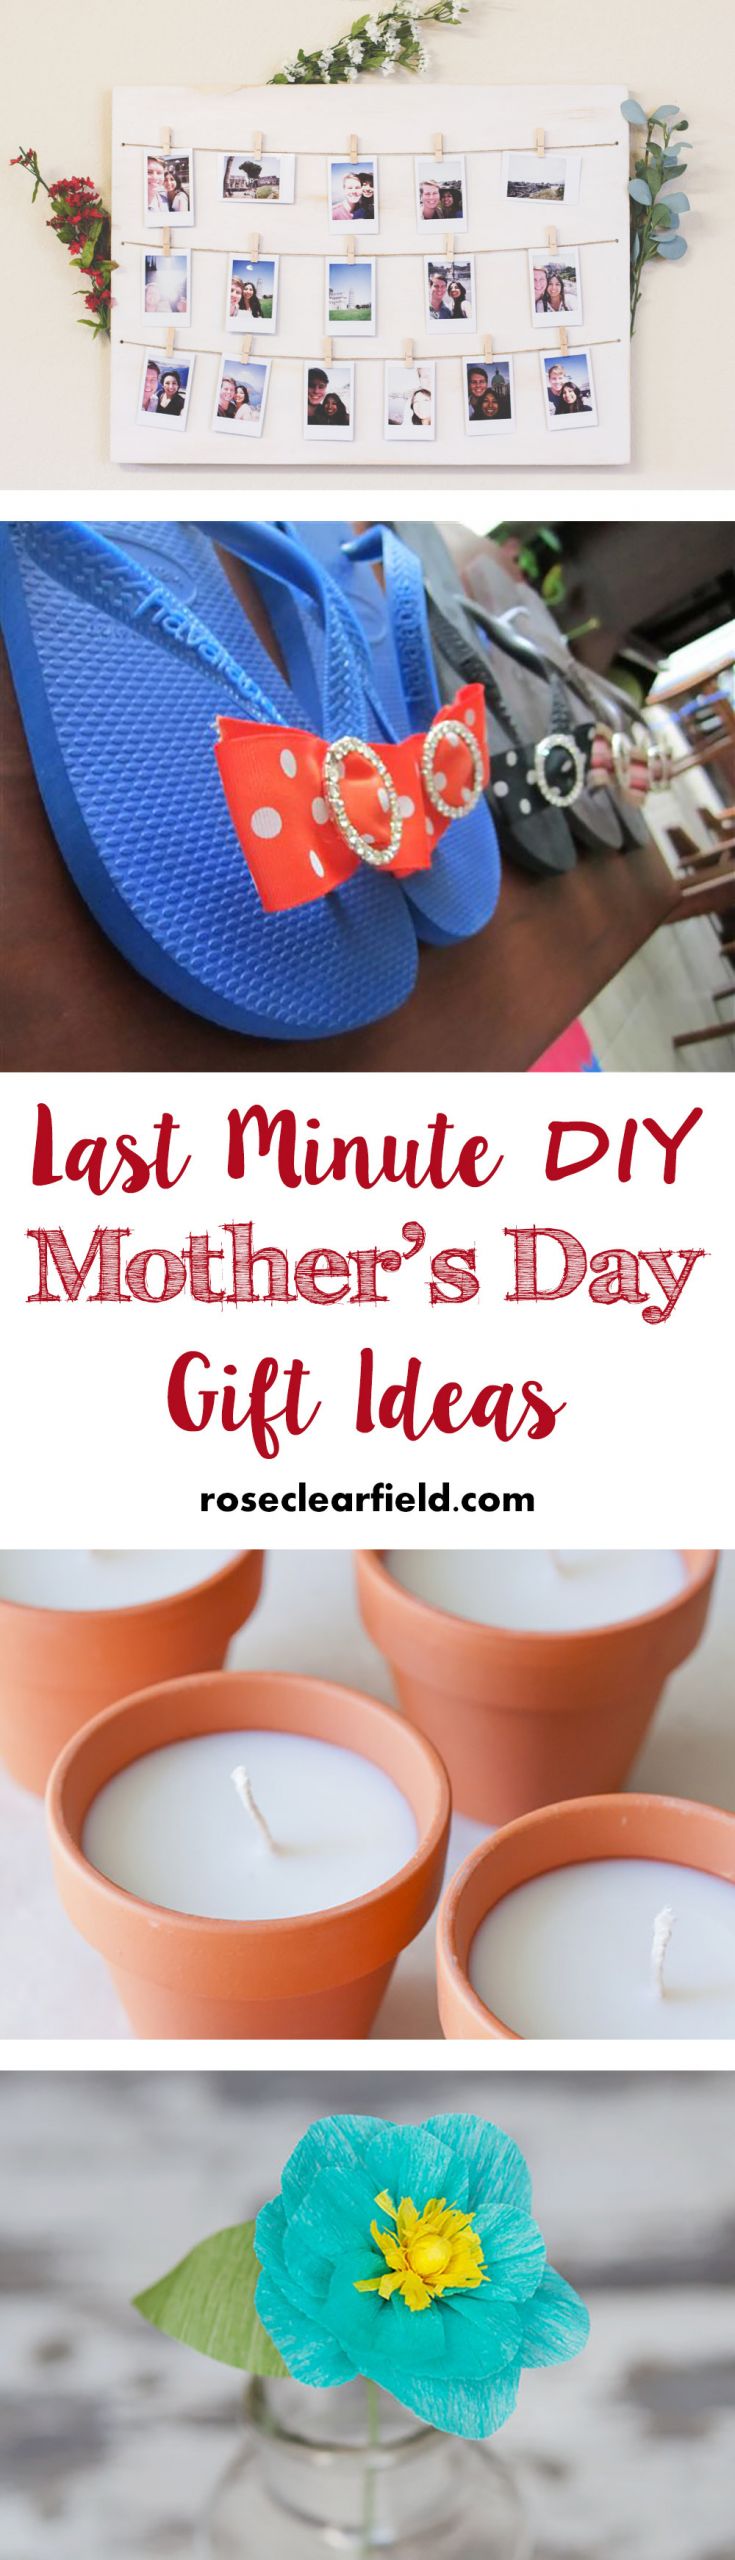 Last Minute DIY Gifts For Mom
 Last Minute DIY Mother s Day Gift Ideas • Rose Clearfield